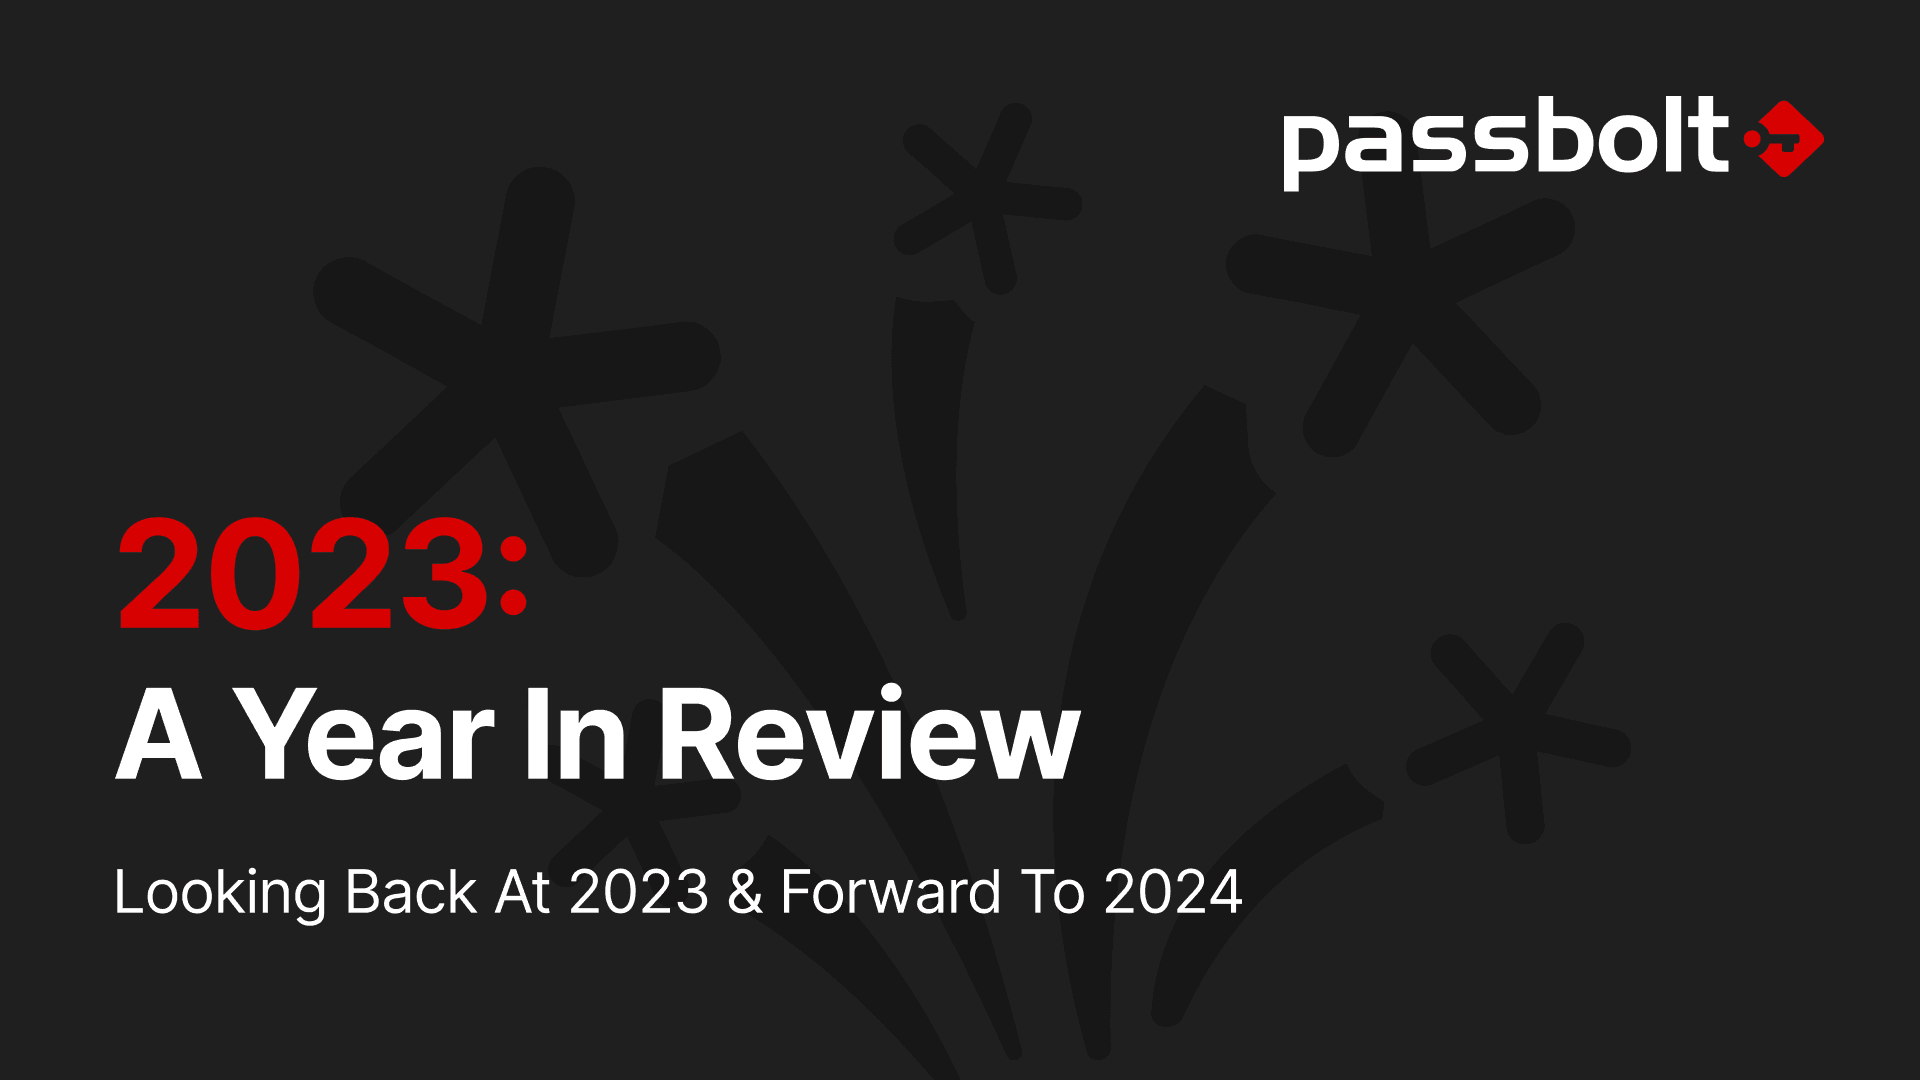 Passbolt 2023: A Year in Review